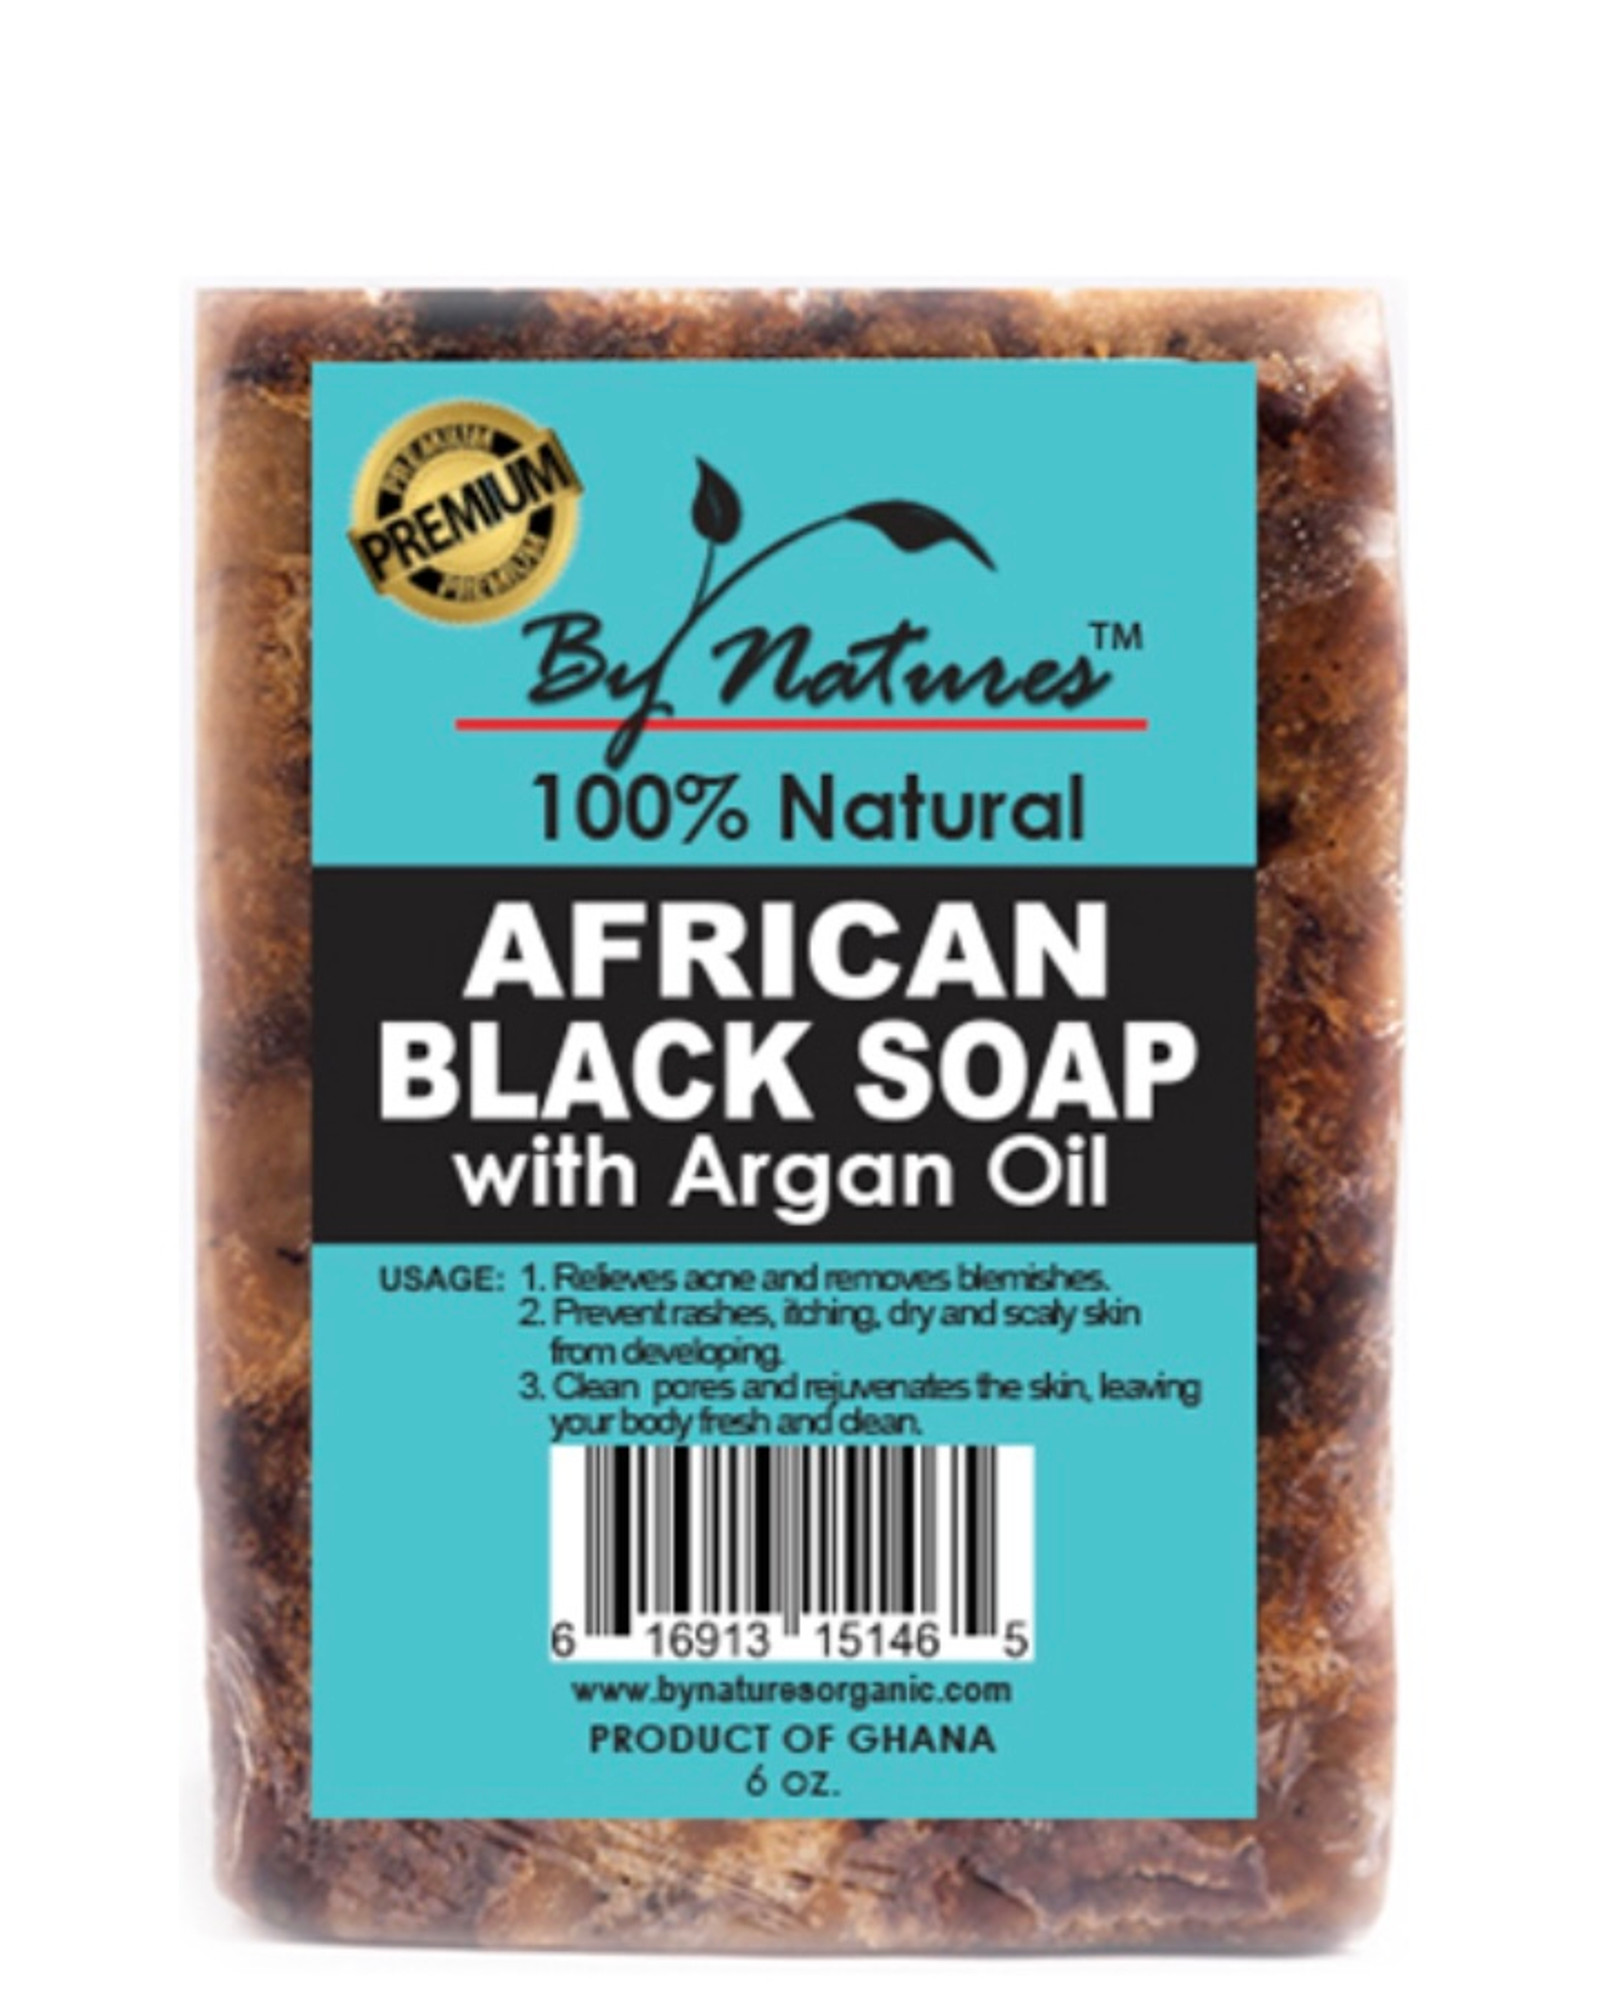 By Natures 100% Natural African Black Soap with Argan Oil